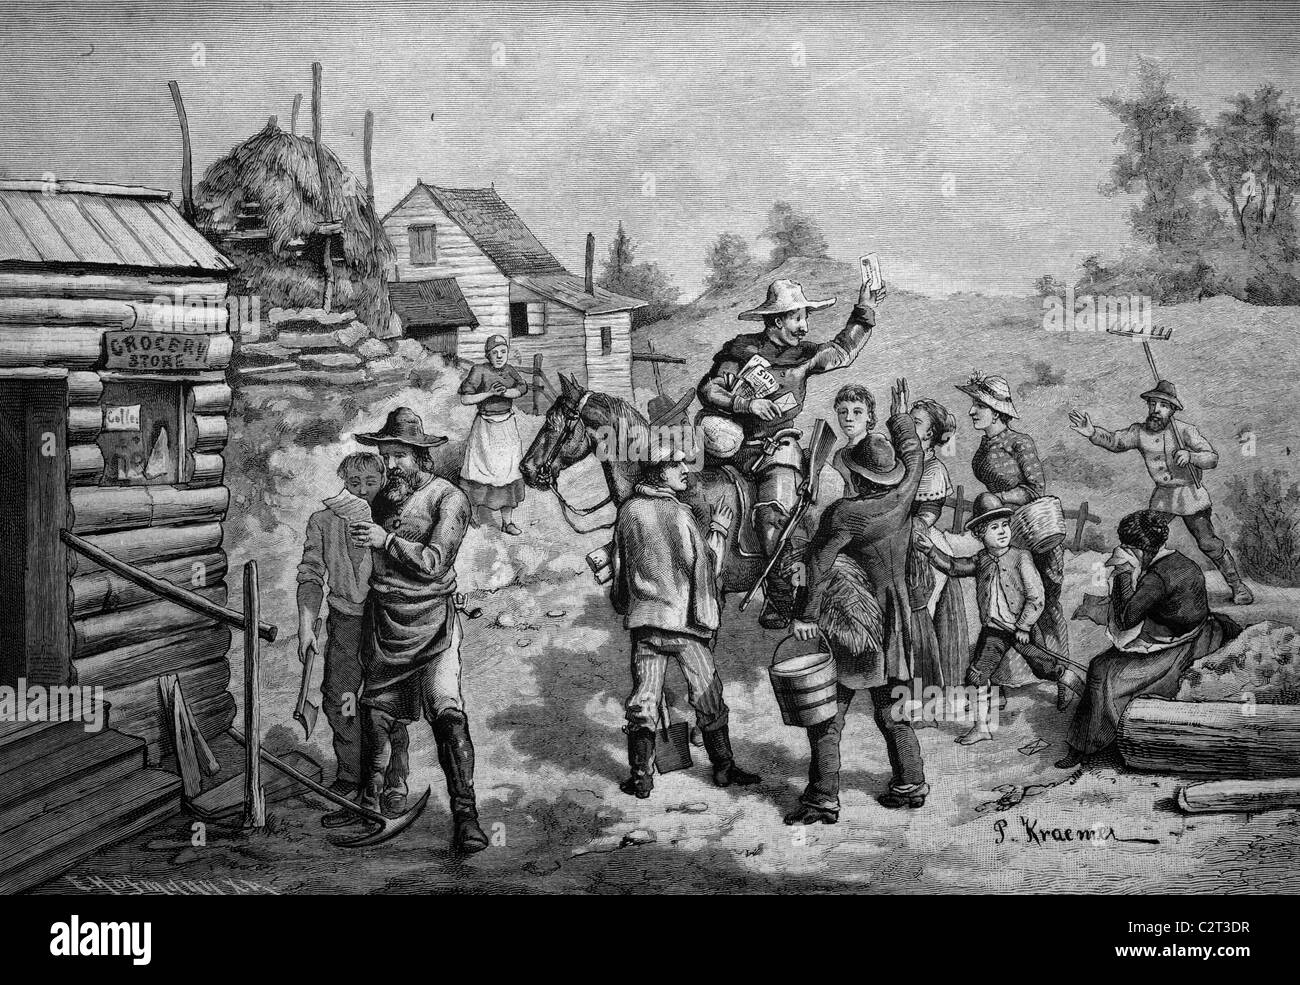 The first postman arriving at a new settlement in the Wild West, America, historical illlustration, about 1886 Stock Photo